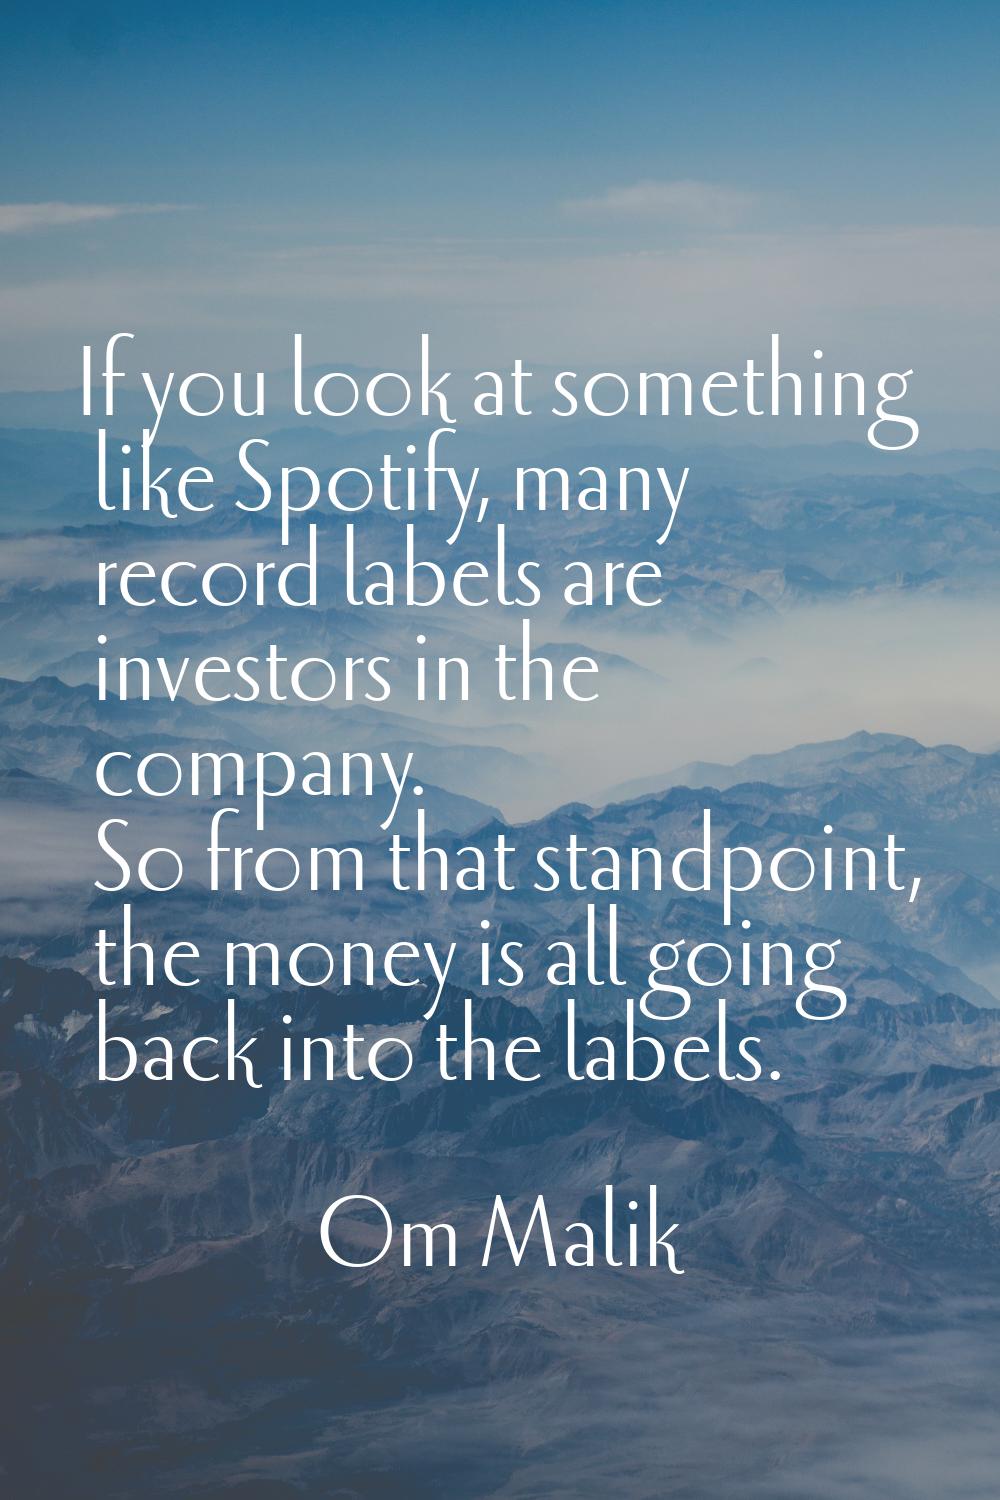 If you look at something like Spotify, many record labels are investors in the company. So from tha